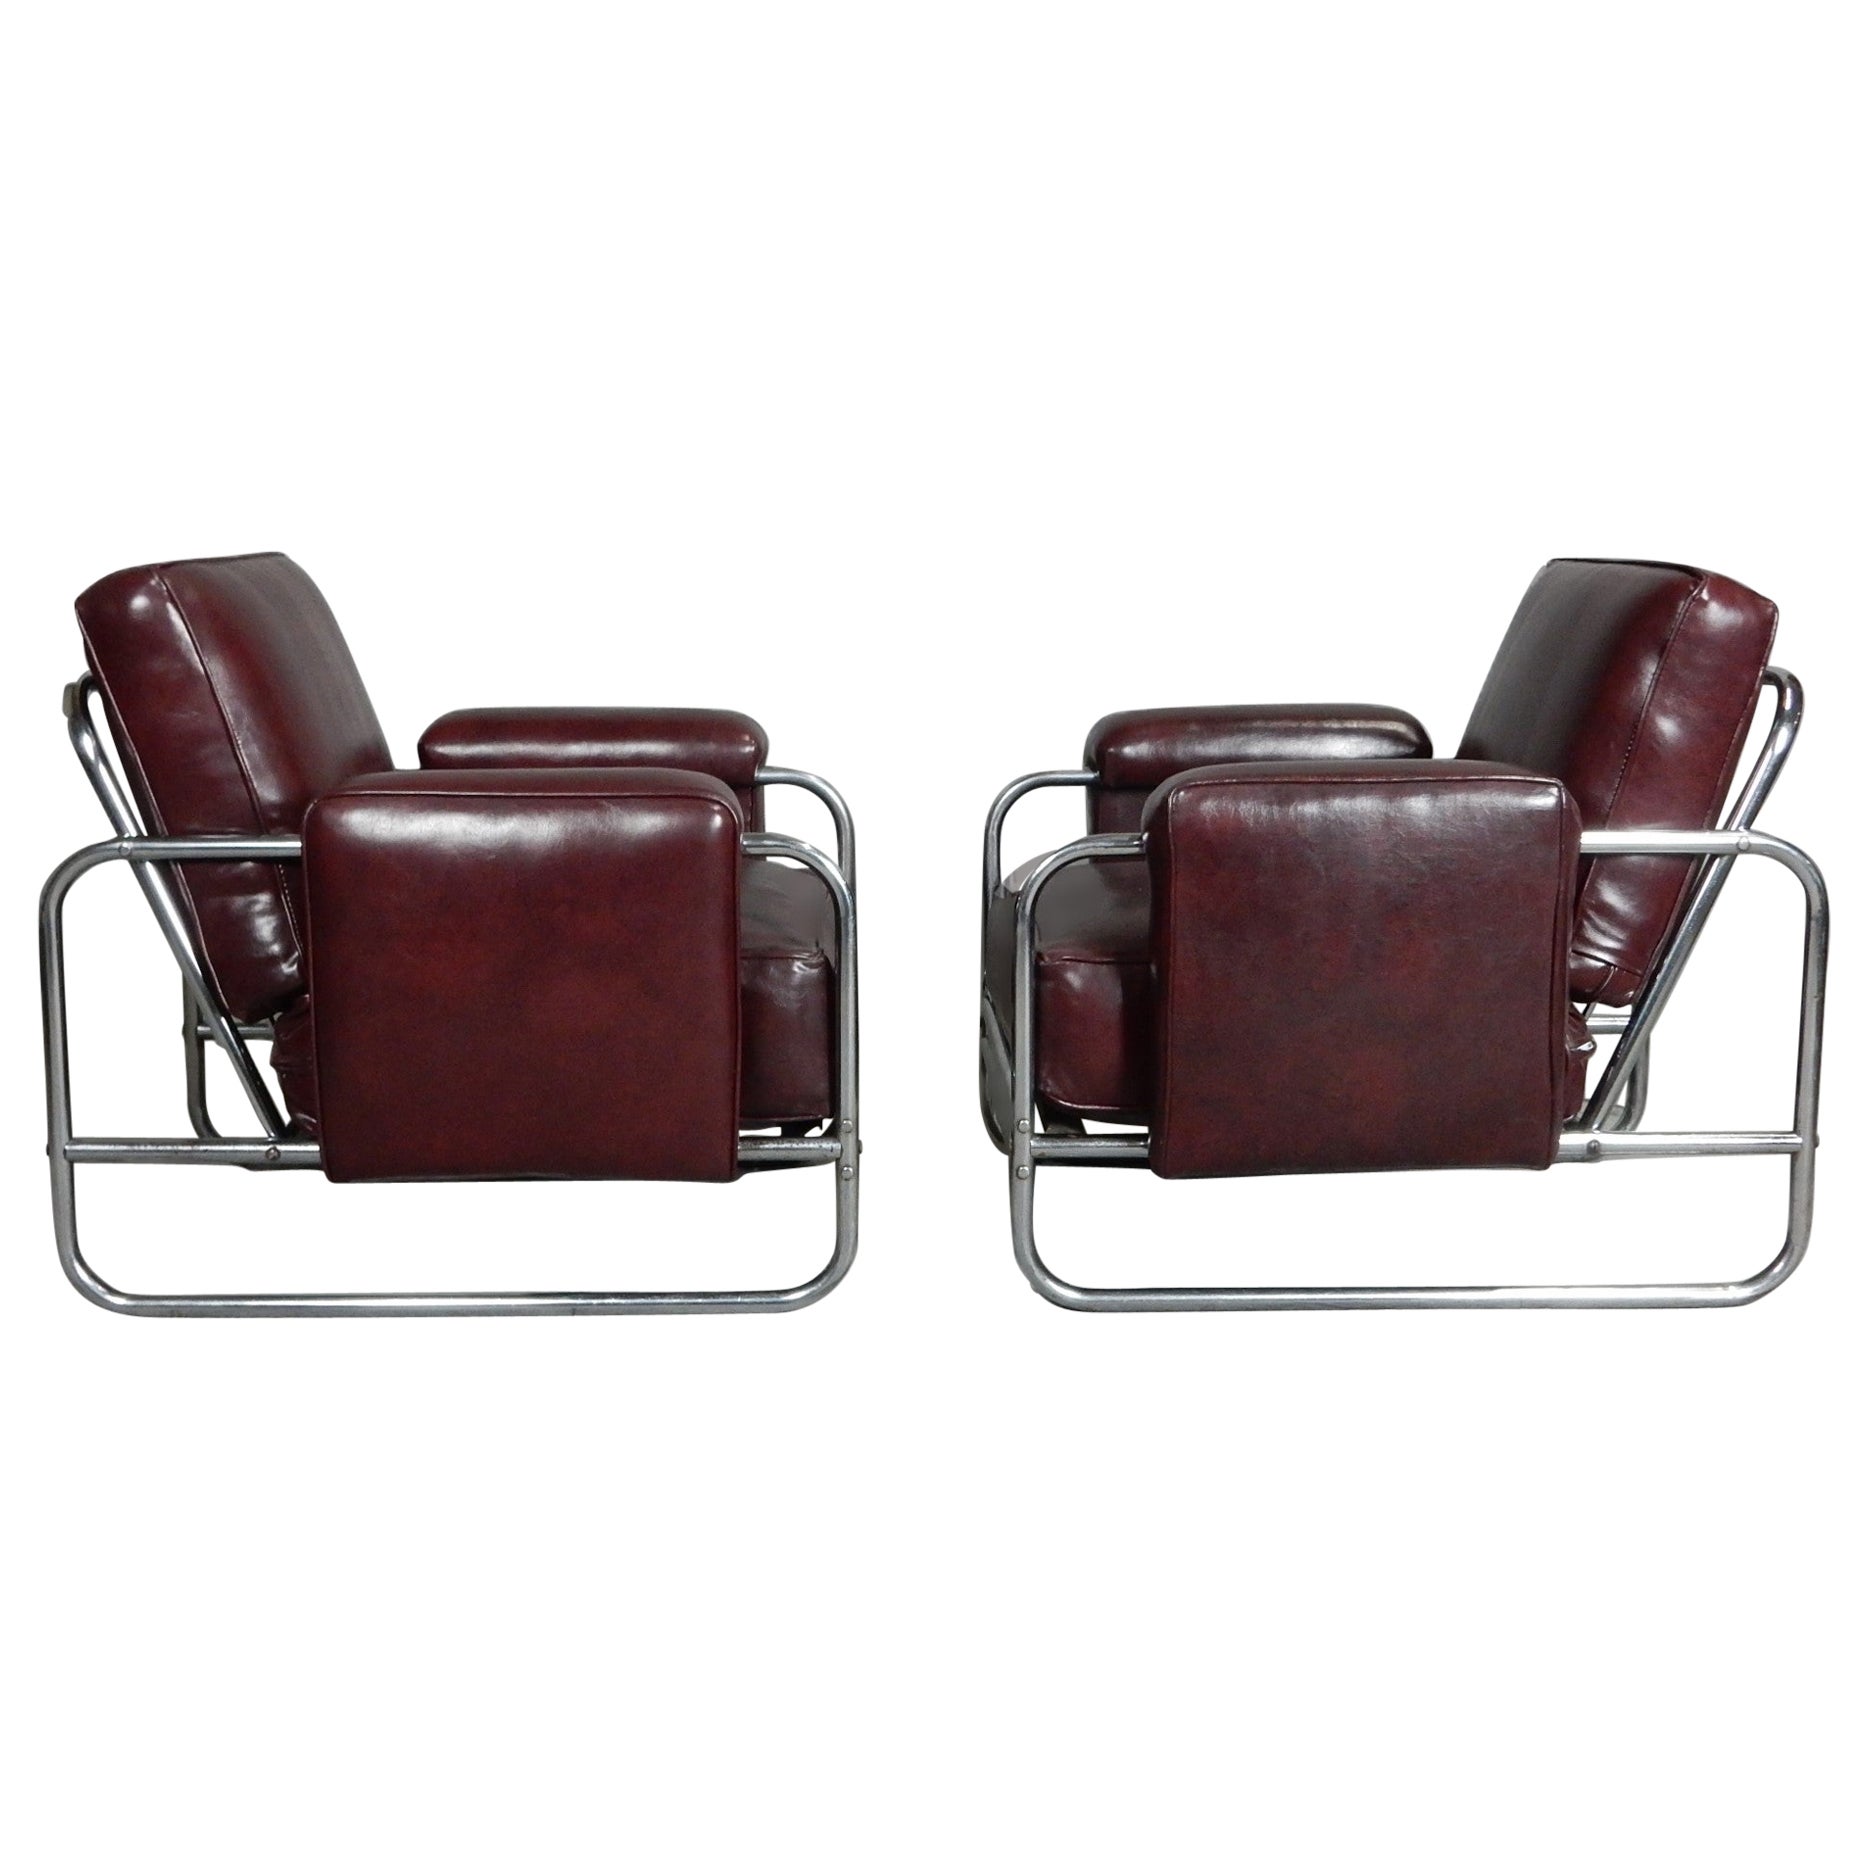 Machine age Industrial Nickel Plated Steel Lounge Chairs